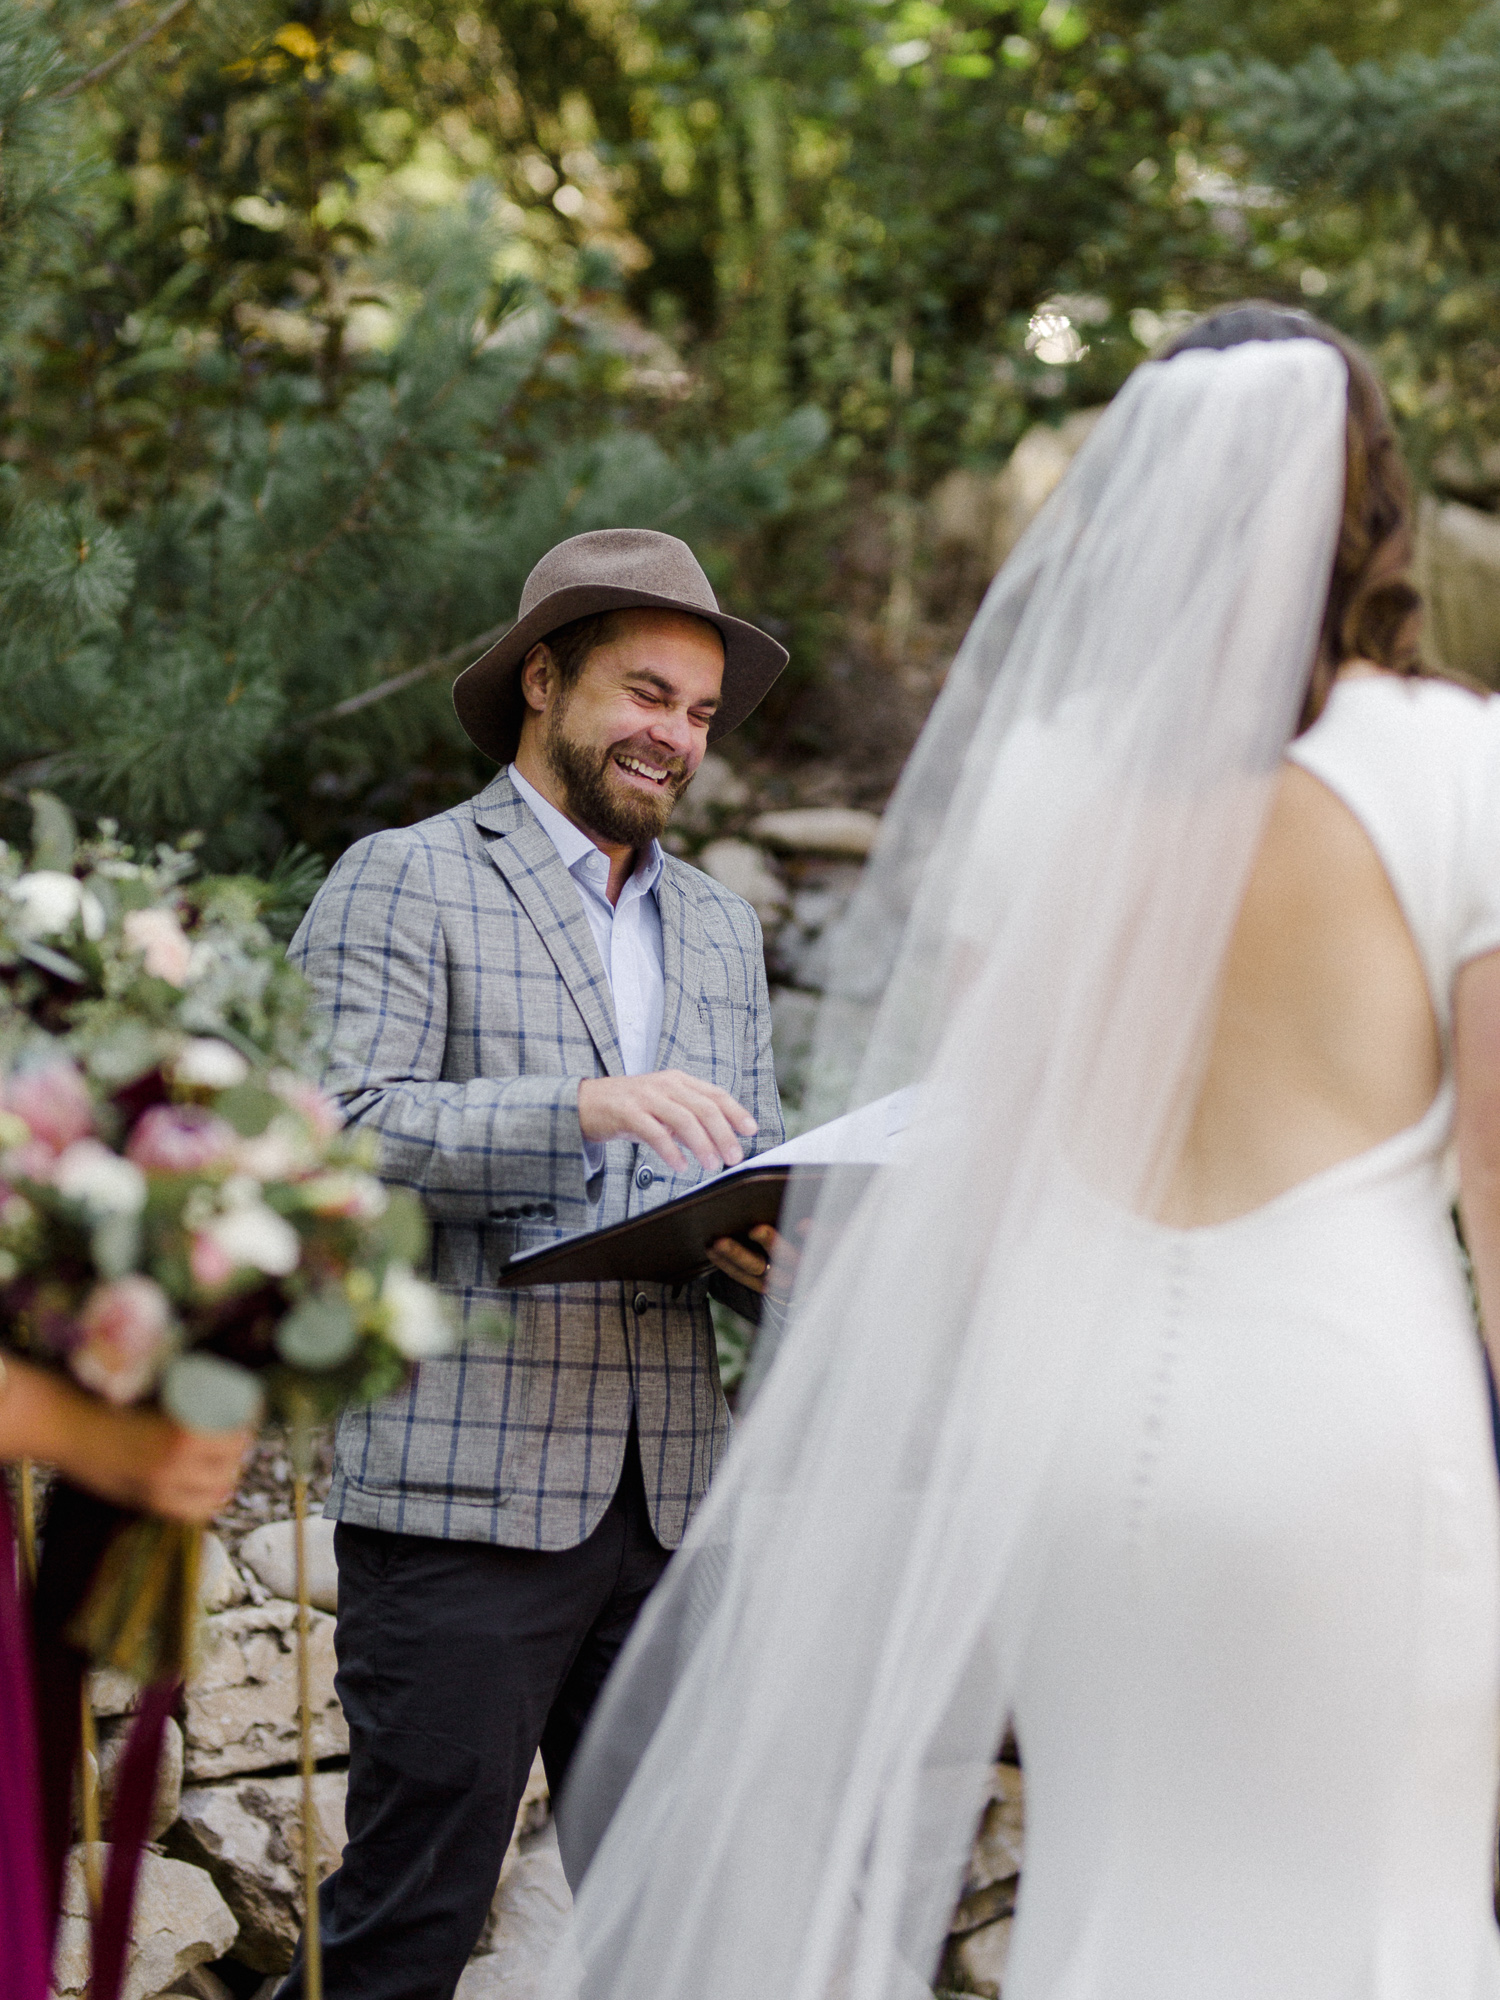 Officiant Laughing at Ceremony.